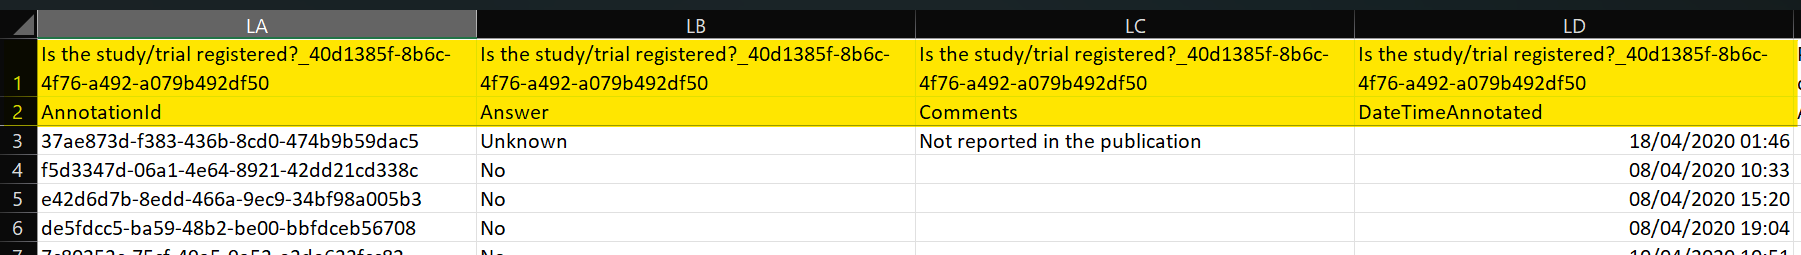 Two header rows with question